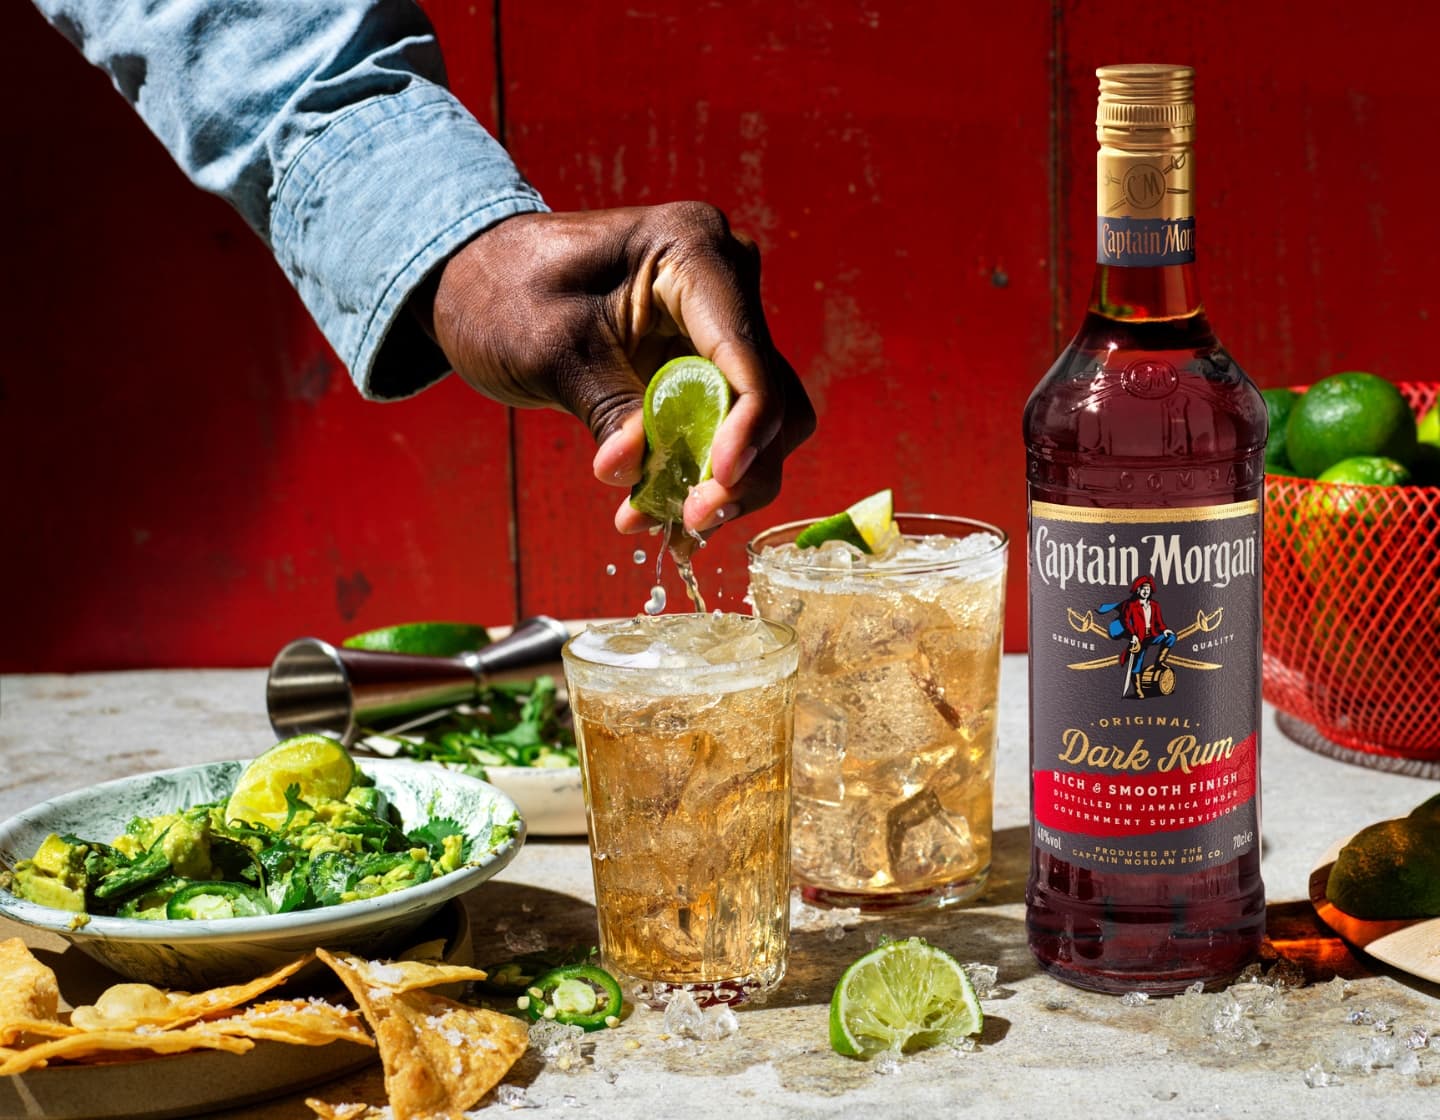 Bottle of Captain Morgan Dark Rum on table surrounded by assorted food and drink against red background with a hand squeezing lime into one of the glasses